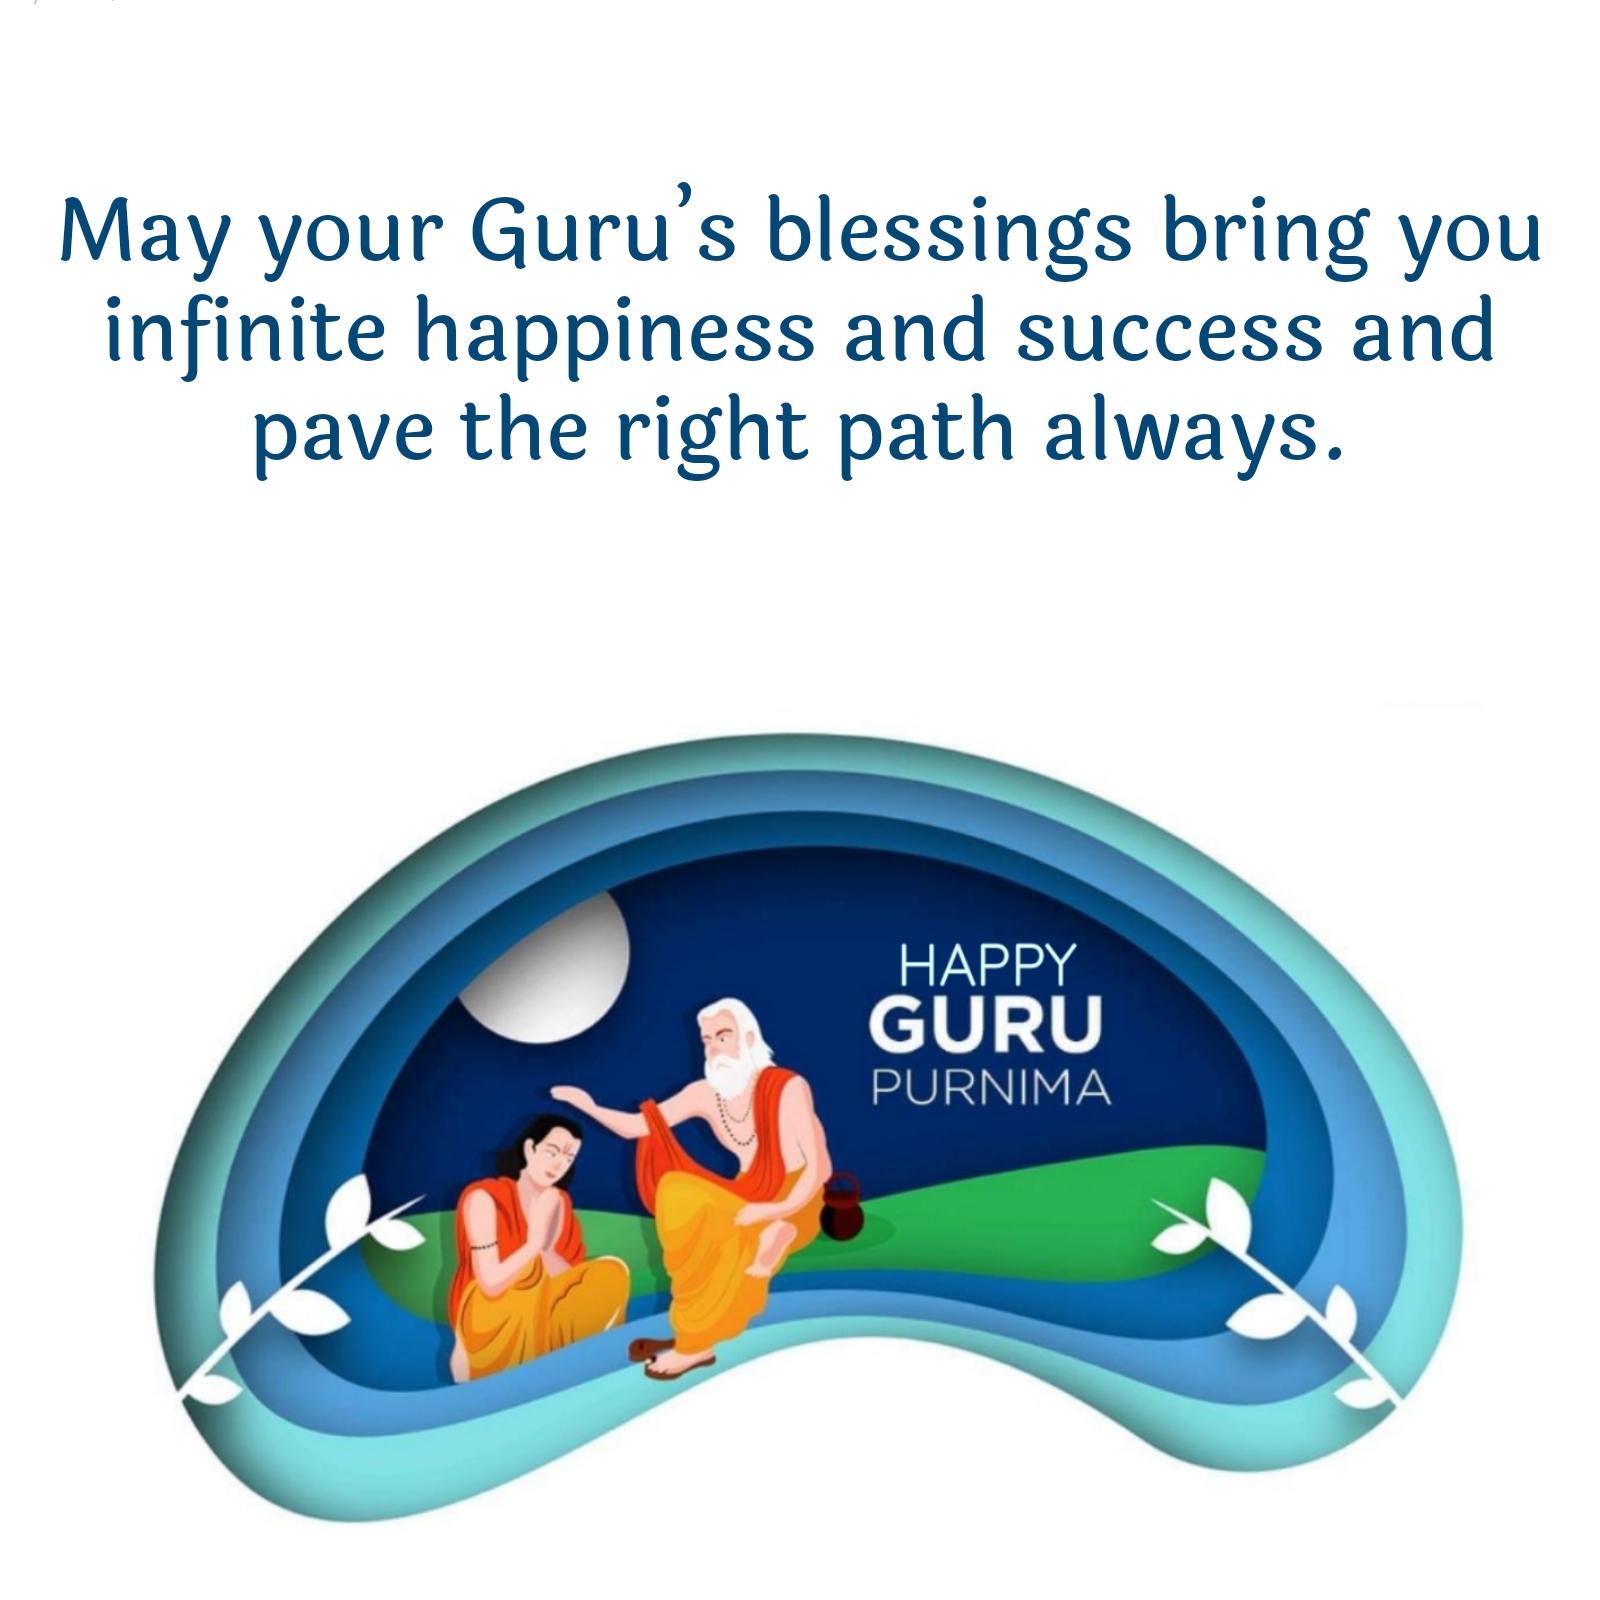 May your Gurus blessings bring you infinite happiness and success